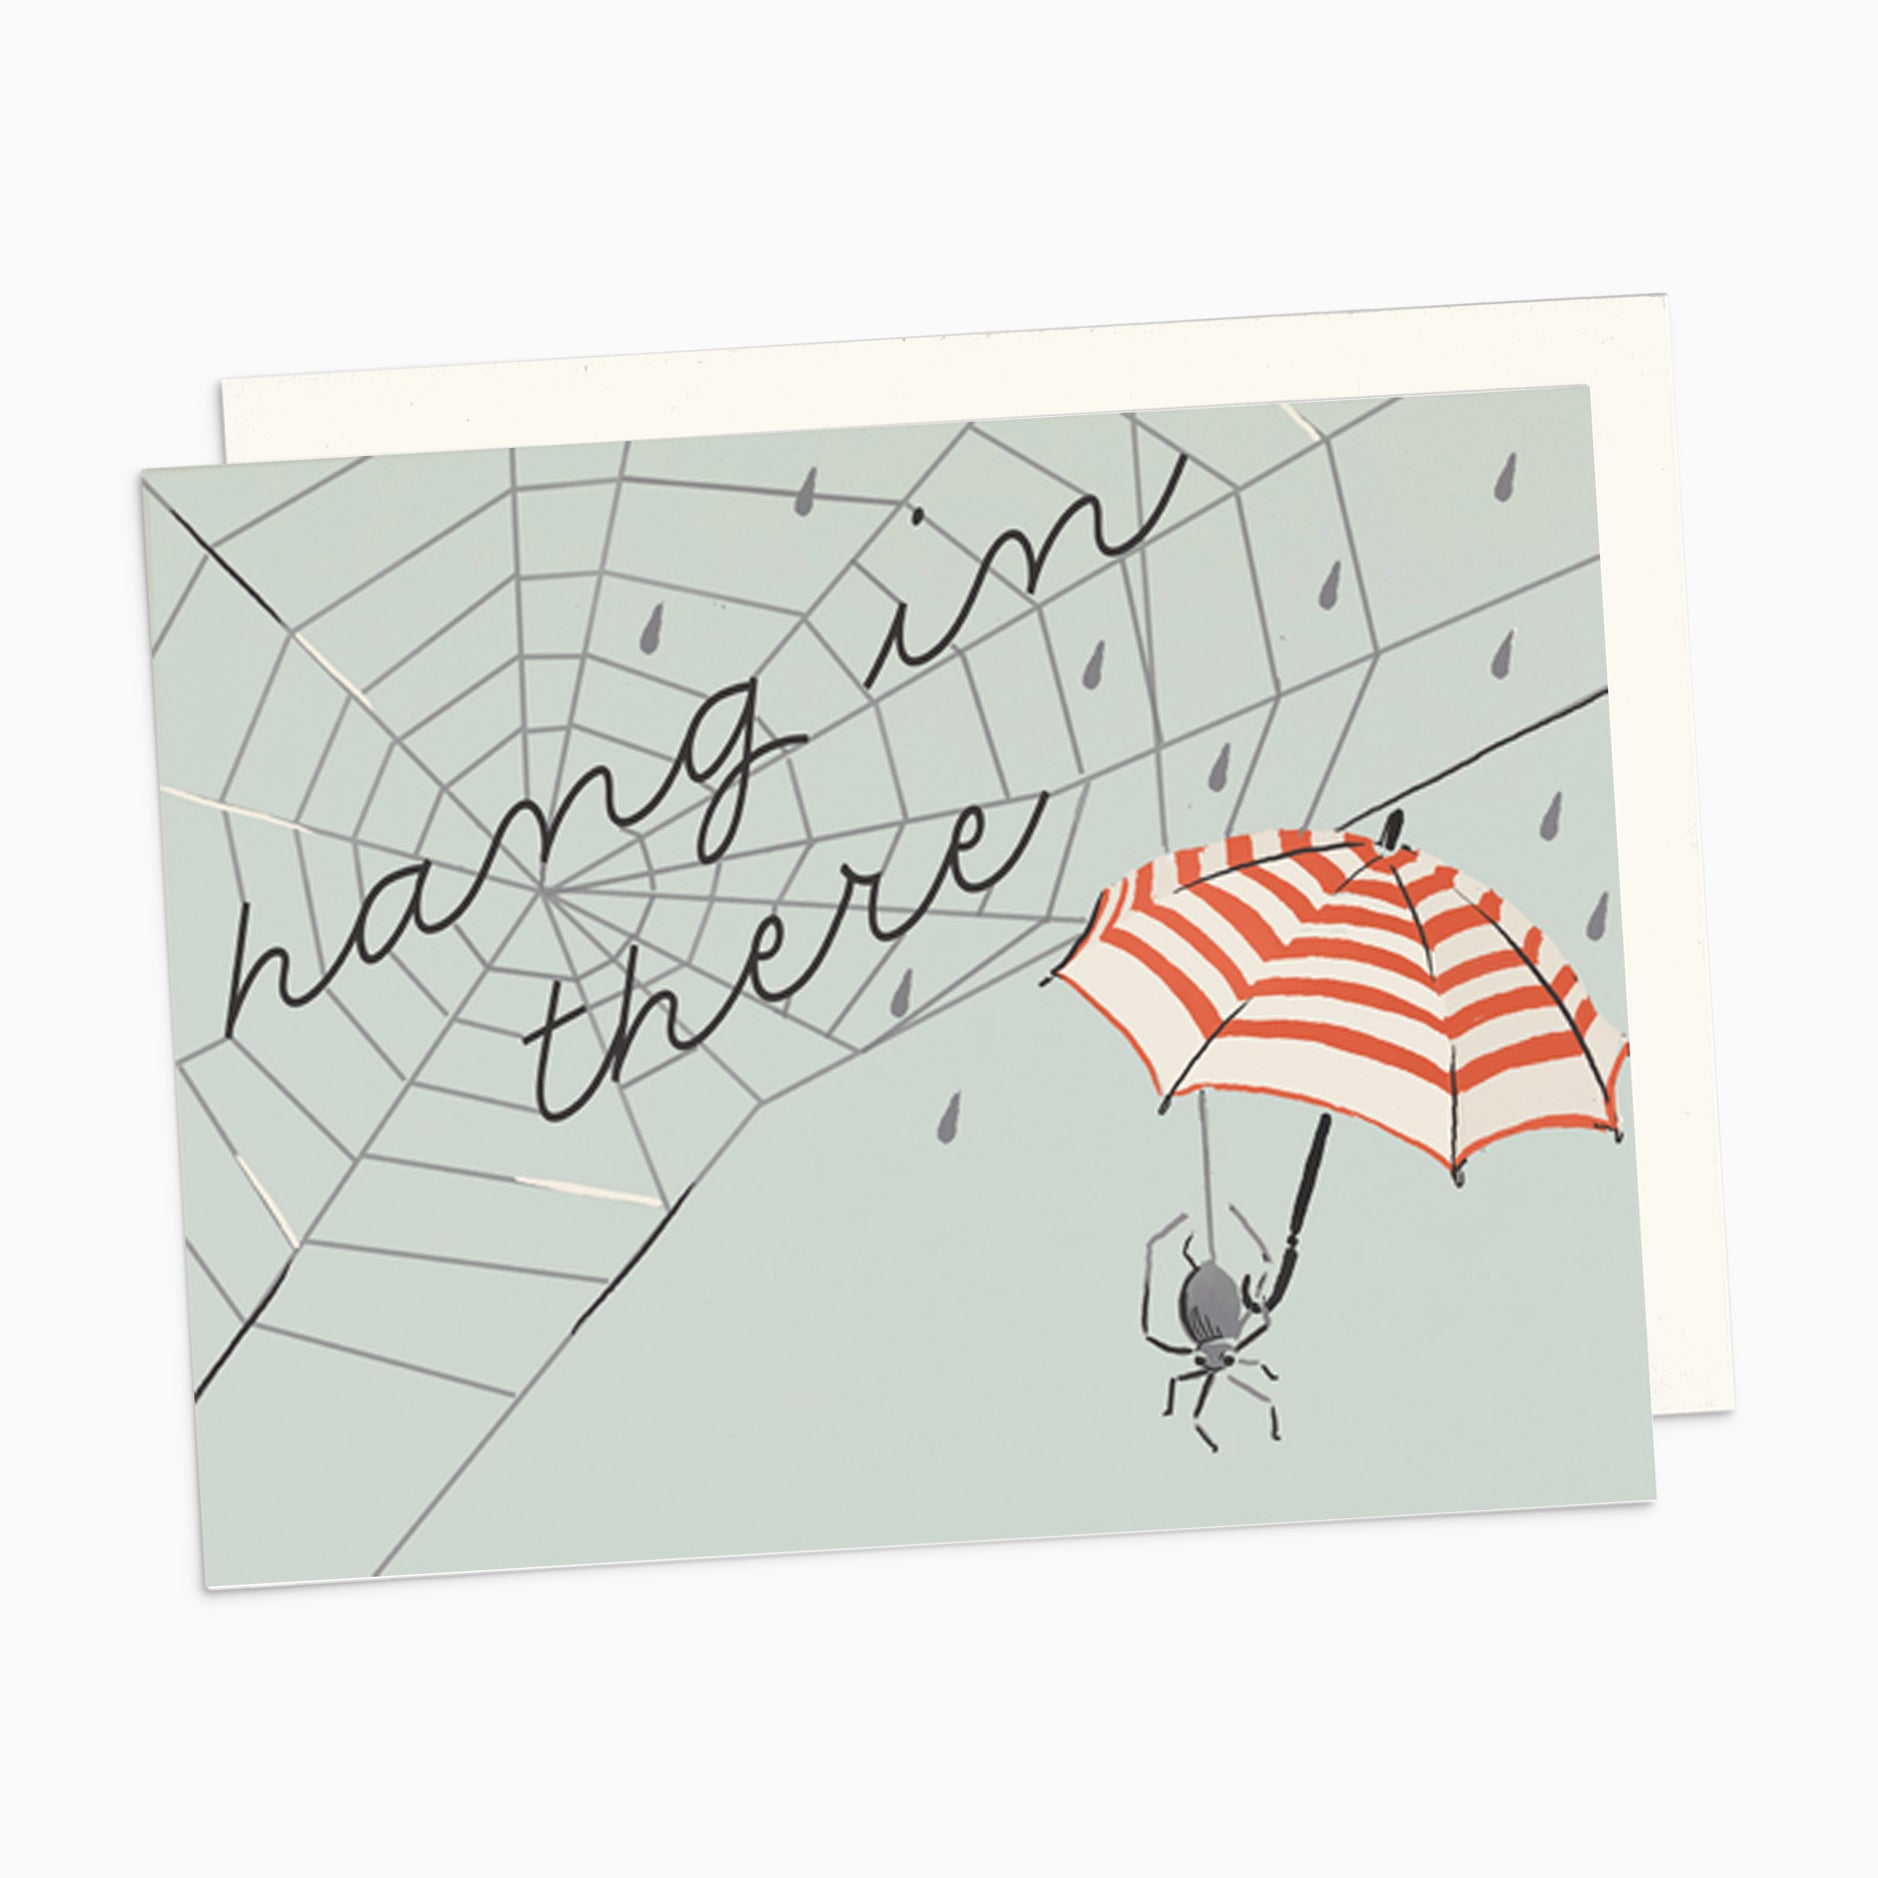 Illustrated sympathy card on premium warm white cardstock, featuring a spider web with the words 'Hang in There' and a spider holding a red and white striped umbrella on a pale blue background.